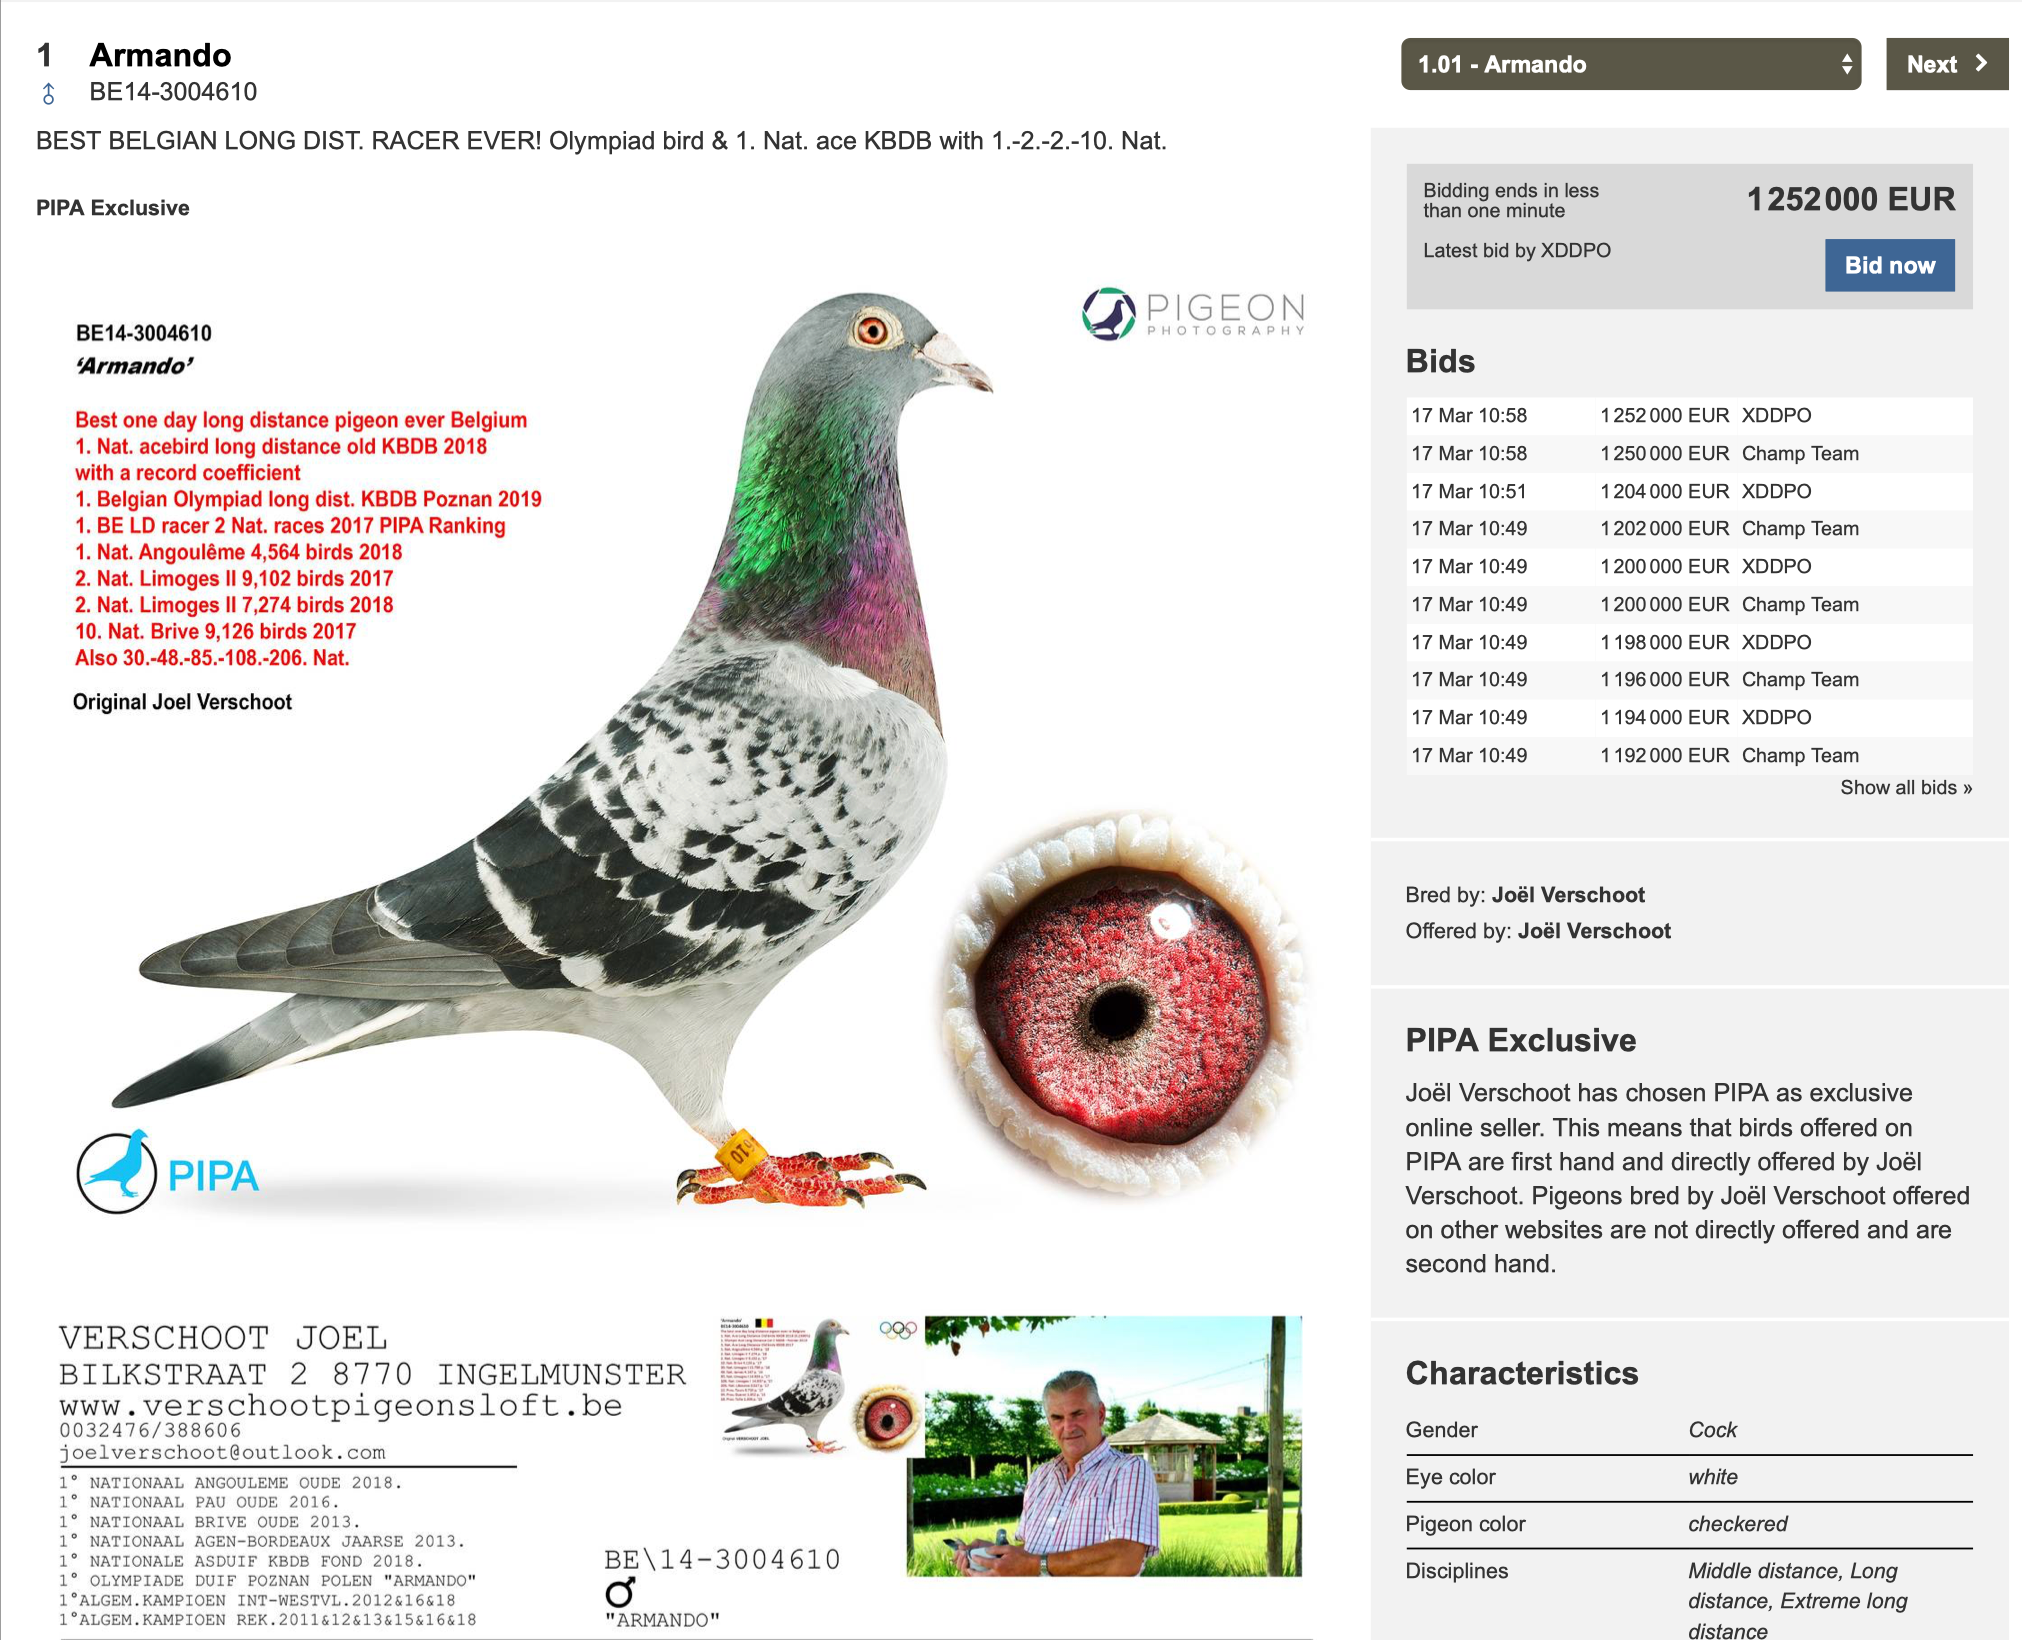 Meet Armando – The Worlds Most Expensive Racing Pigeon. €1,250,000.